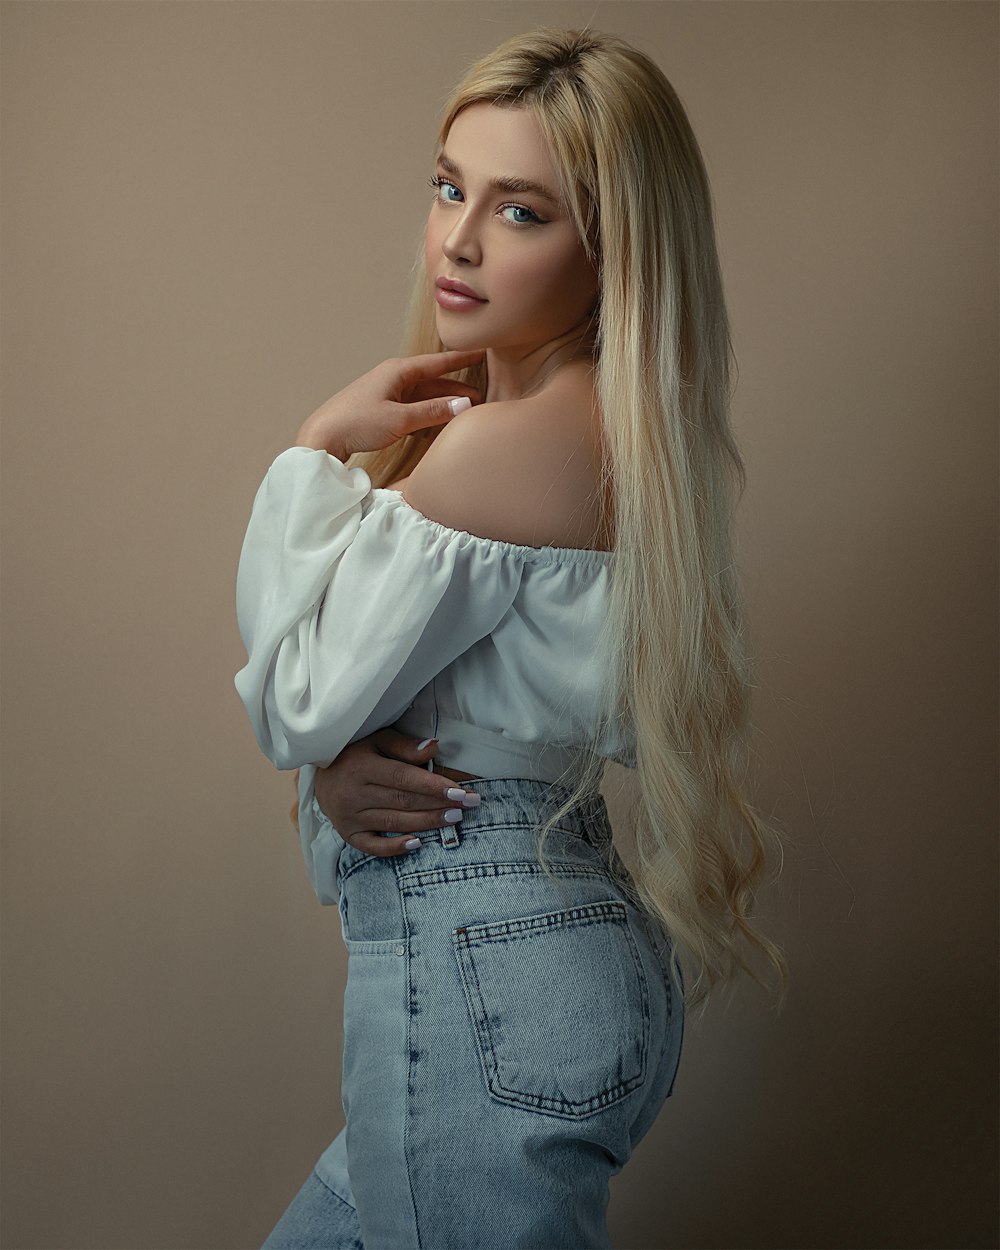 woman in white long sleeve shirt and blue denim jeans